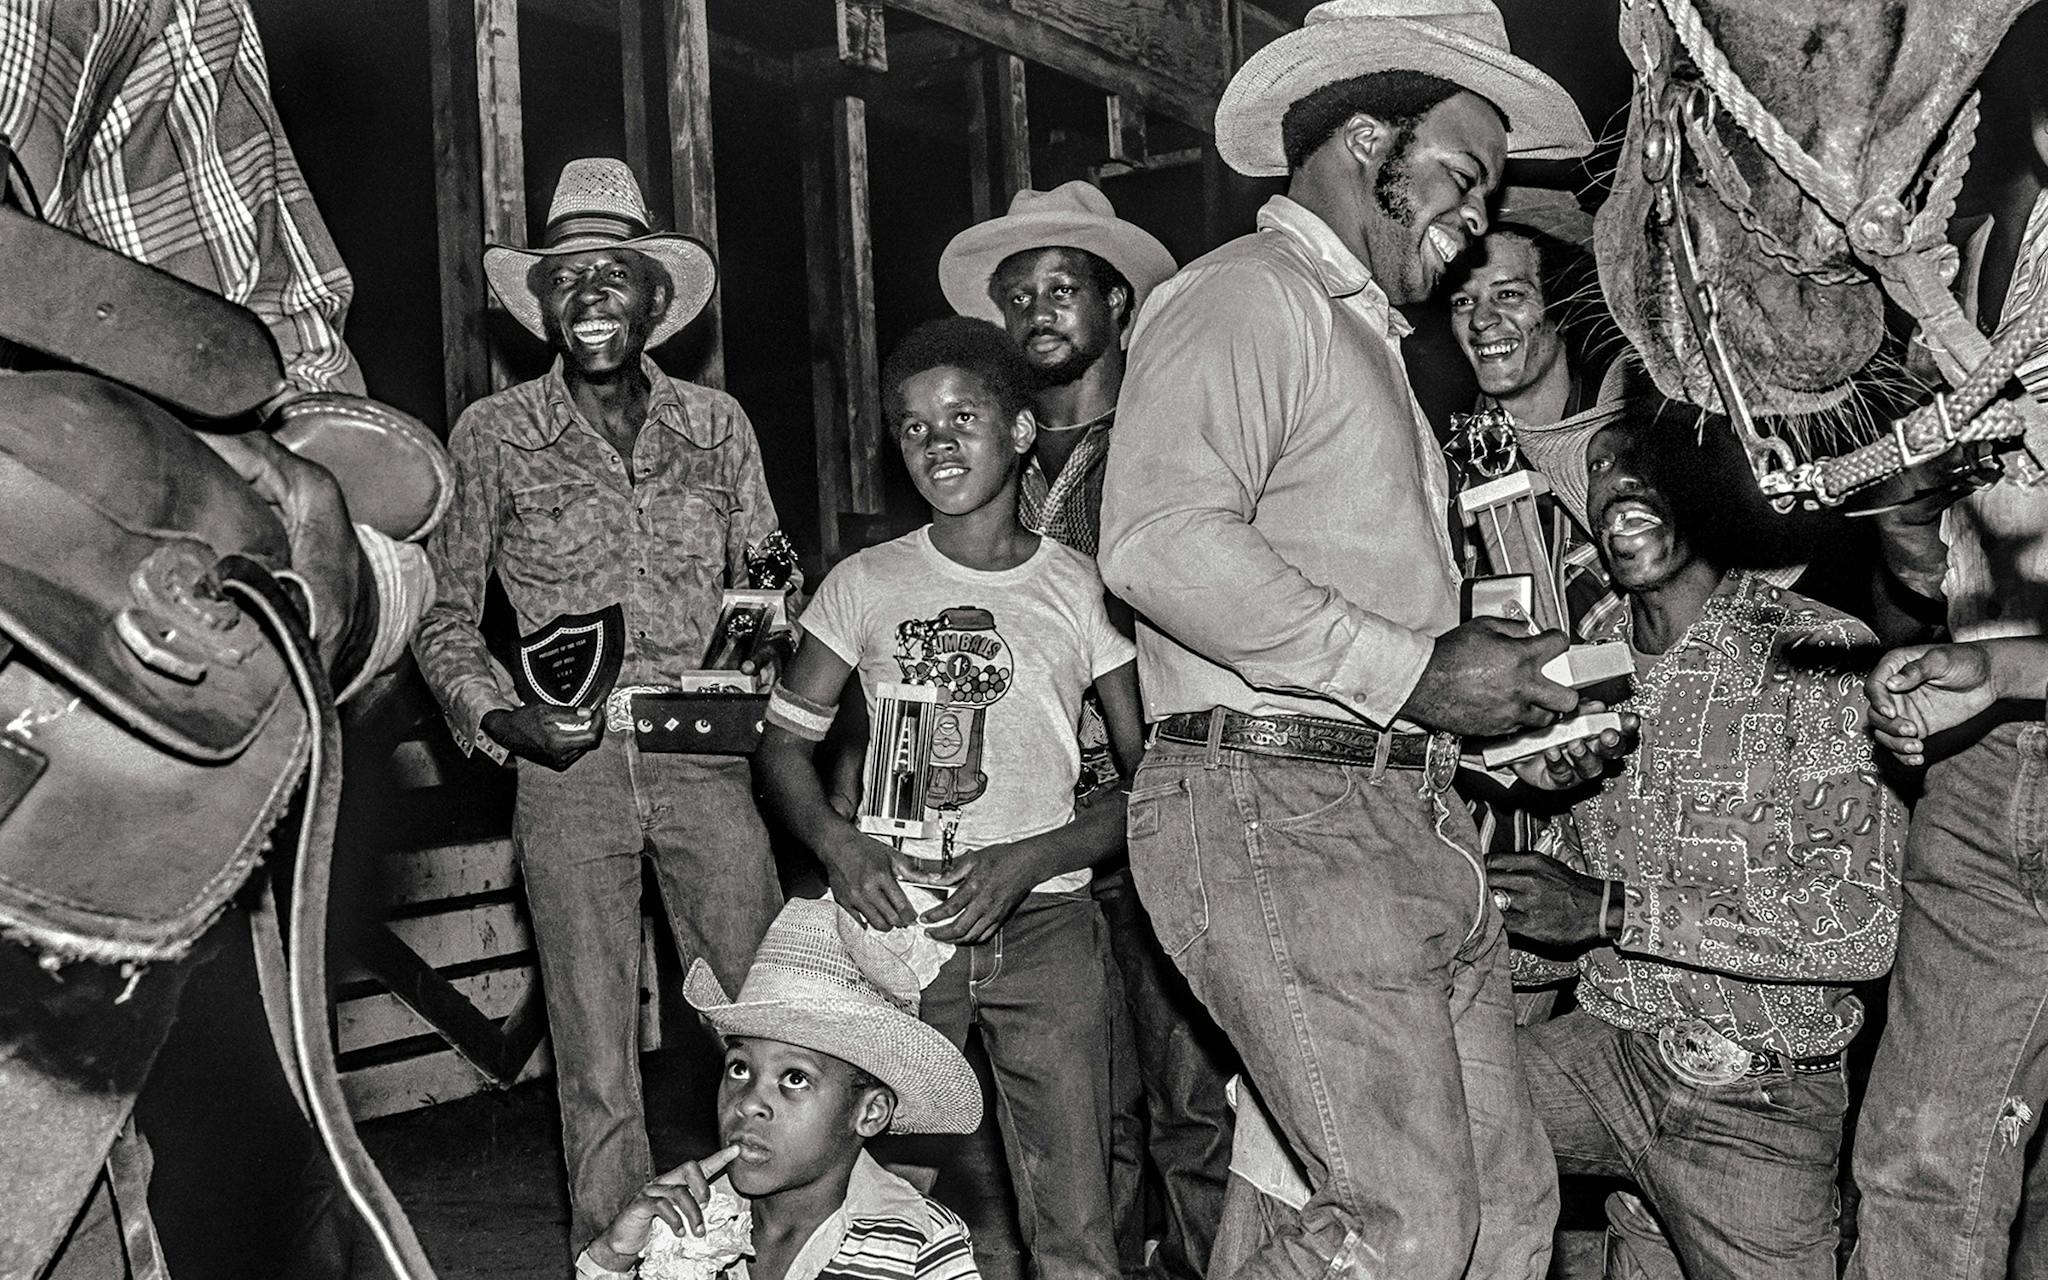 Reginald Page collecting his trophy in 1978 for calf roping while his son, Orlando, also clutching a roping trophy, looks on and rough-stock rider Malloy Scott (second from right) and steer wrestler Jim Richards (kneeling) share a laugh.